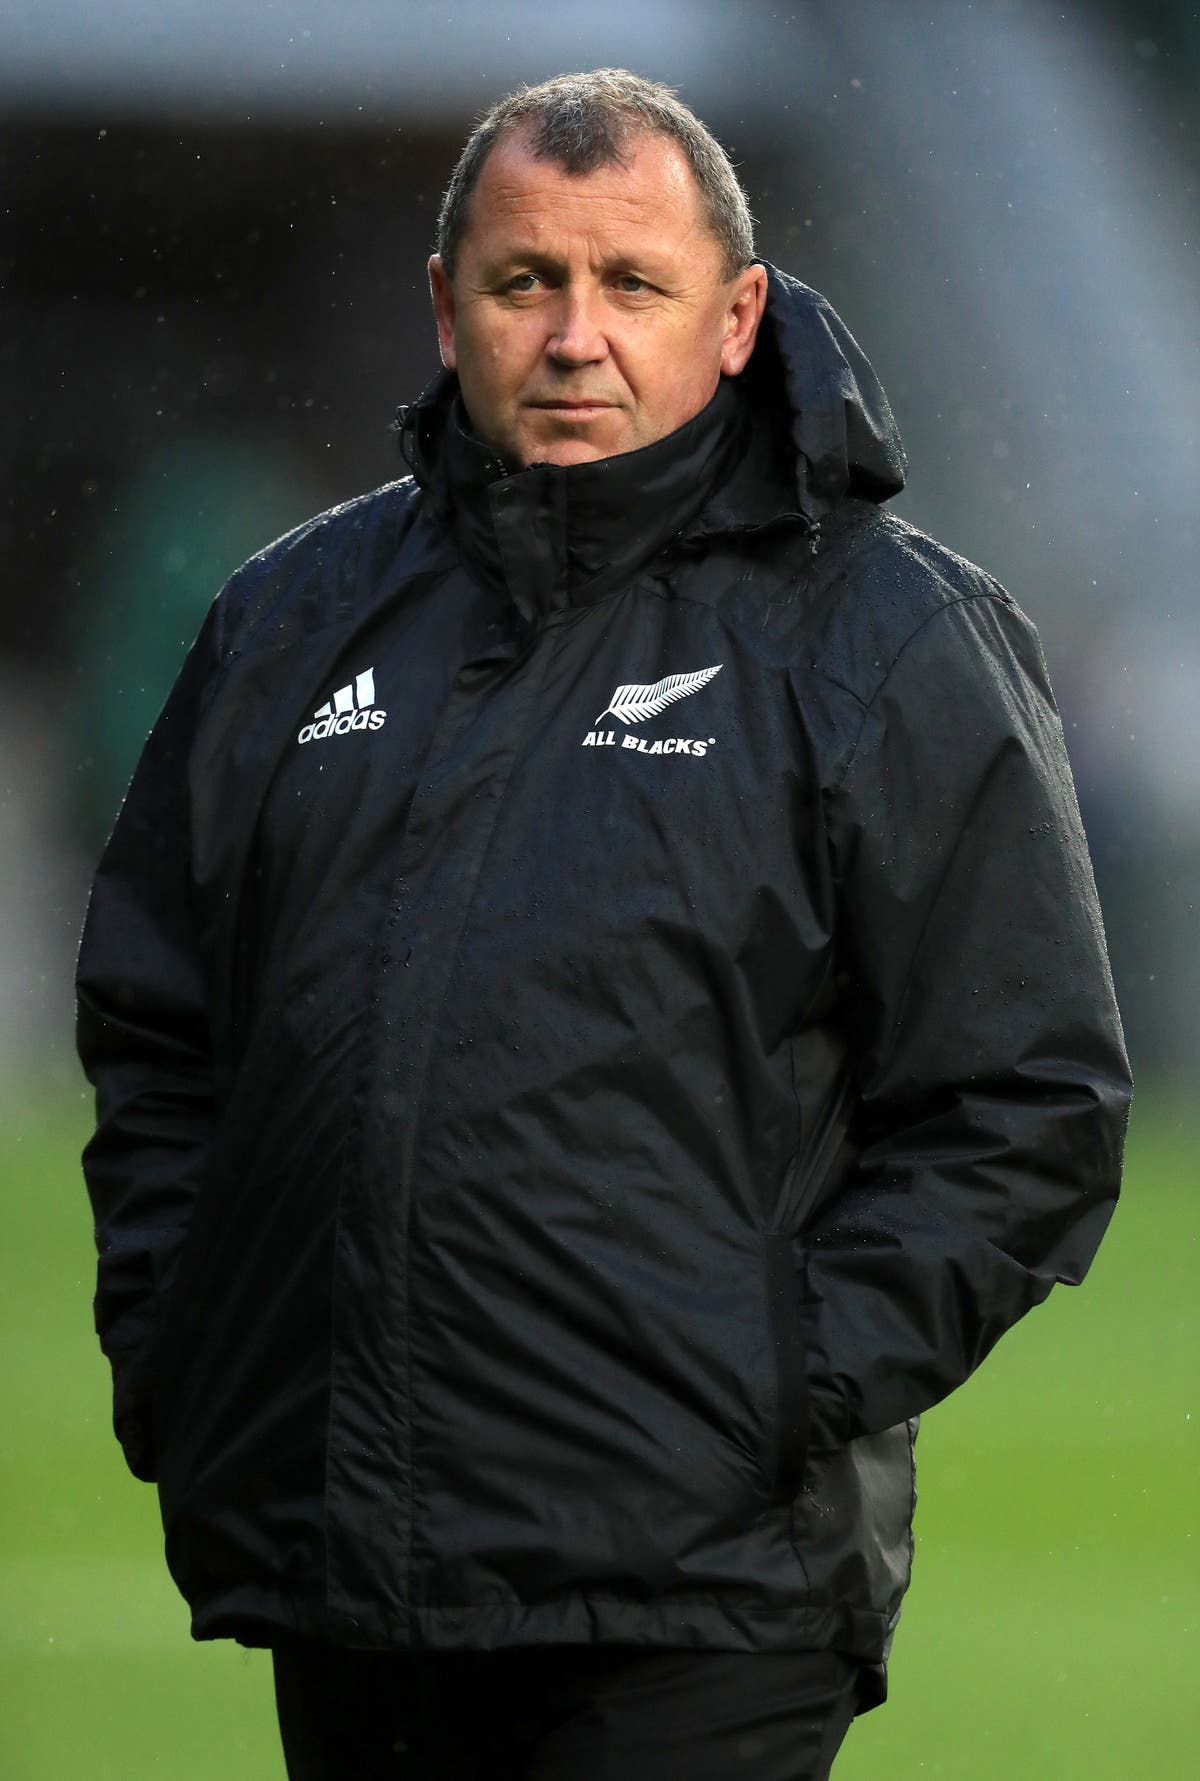 All Blacks coach Ian Foster plays down significance of Wales’ raft of absentees